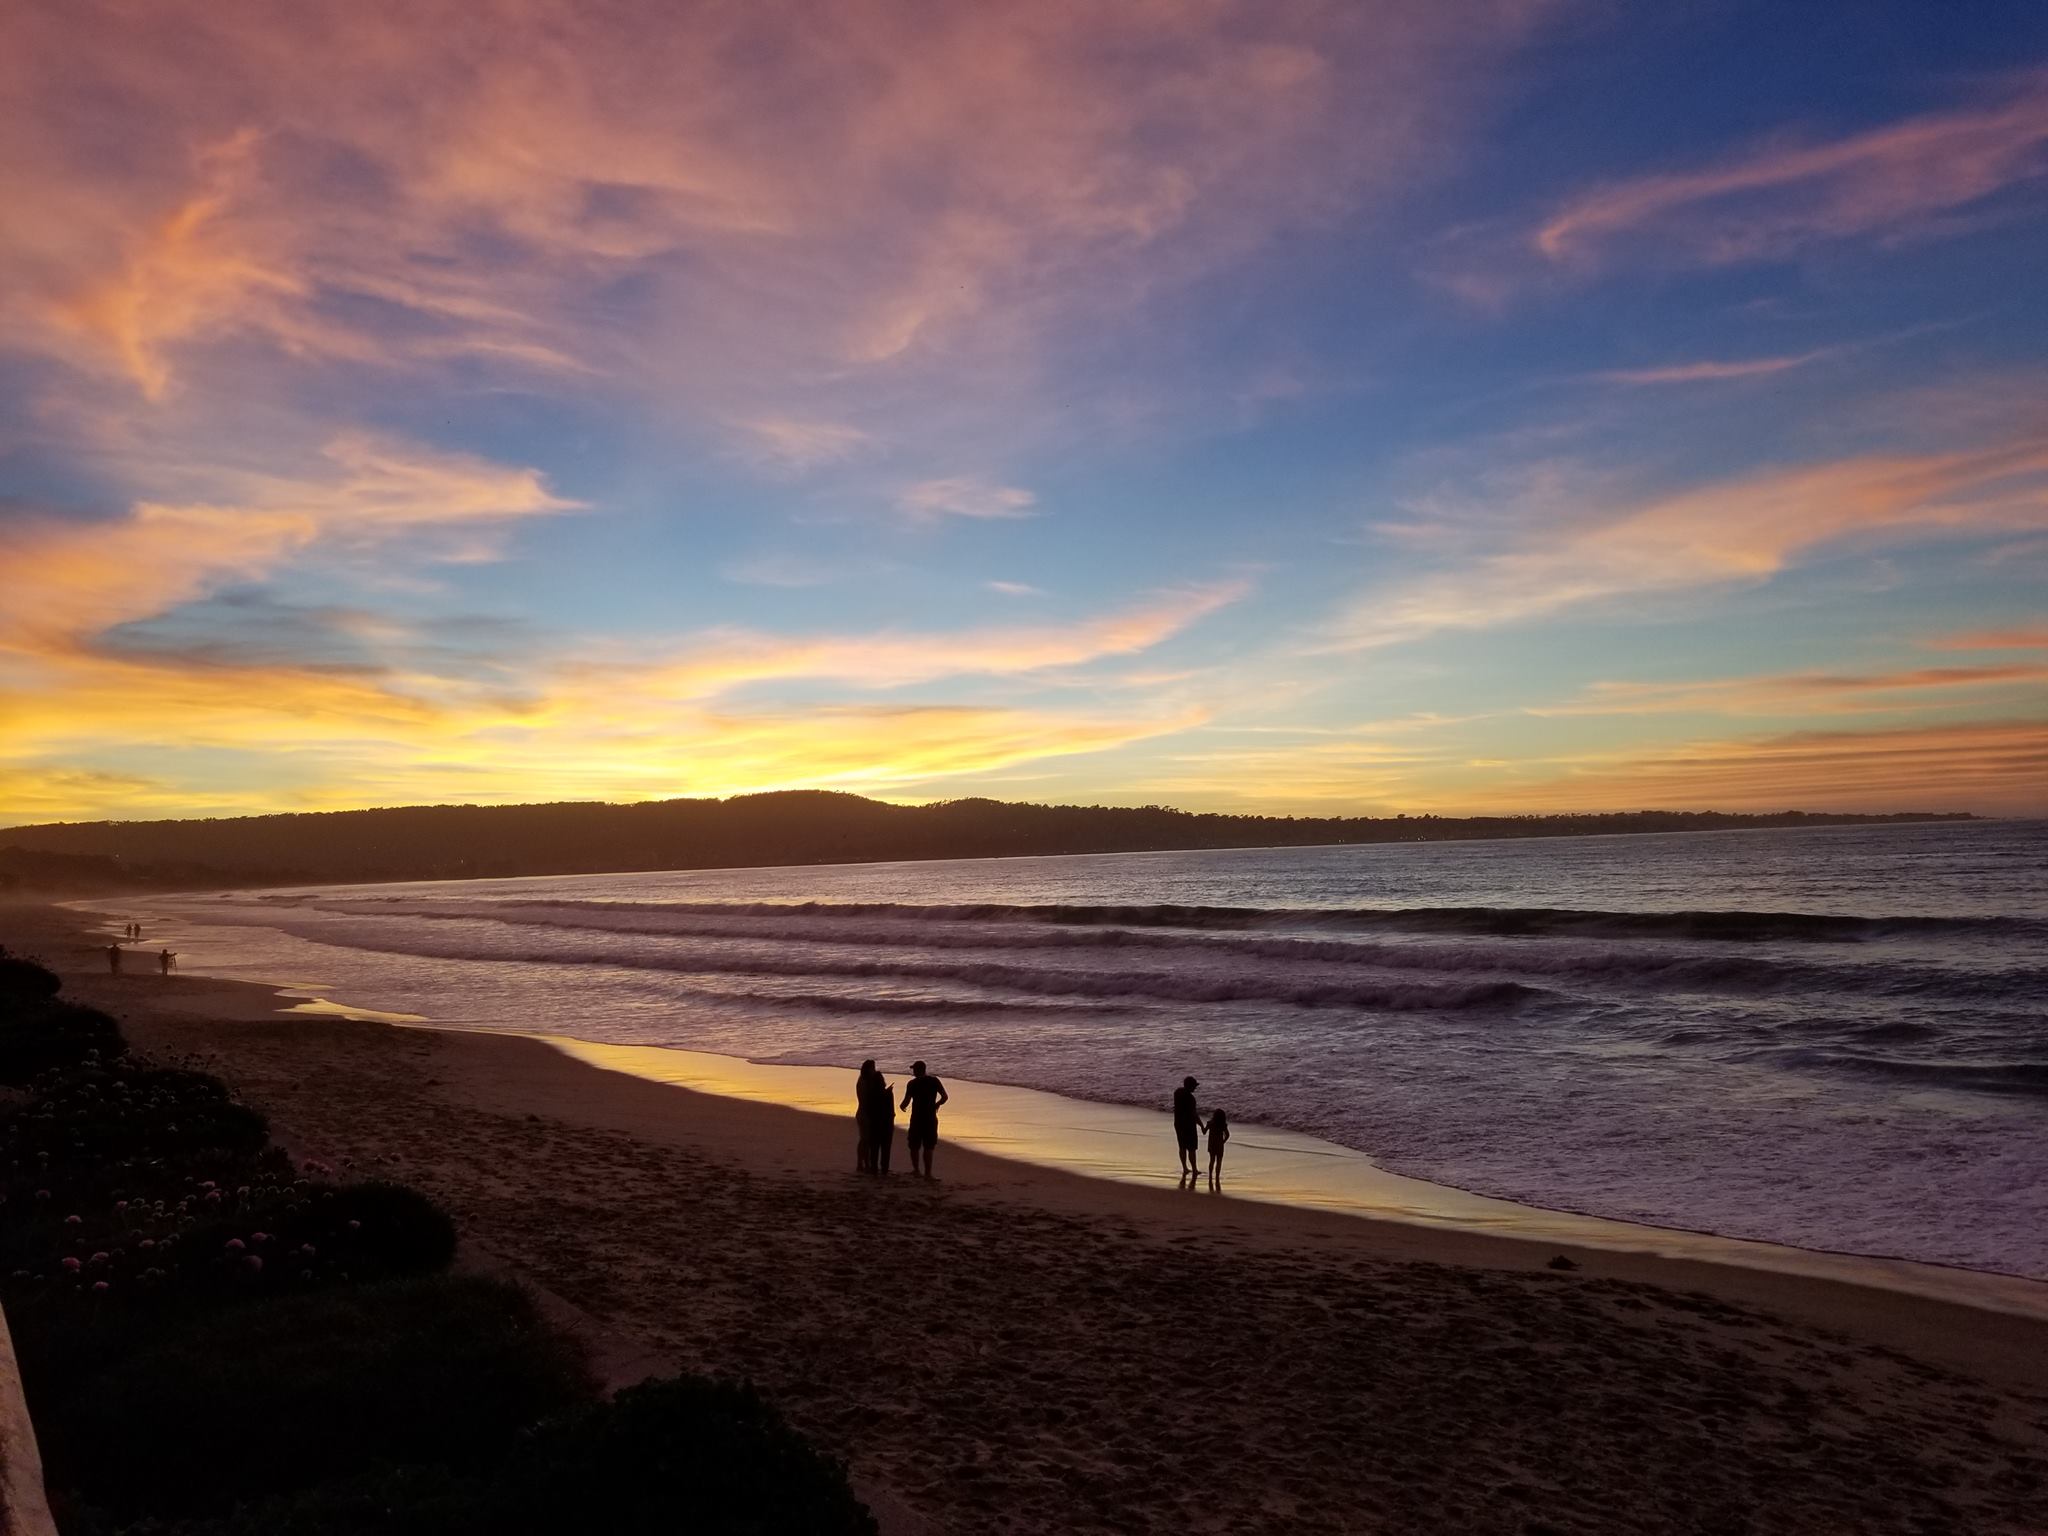 Sunset at the Monterey Tides Hotel, Monterey, CA (11-3-18)